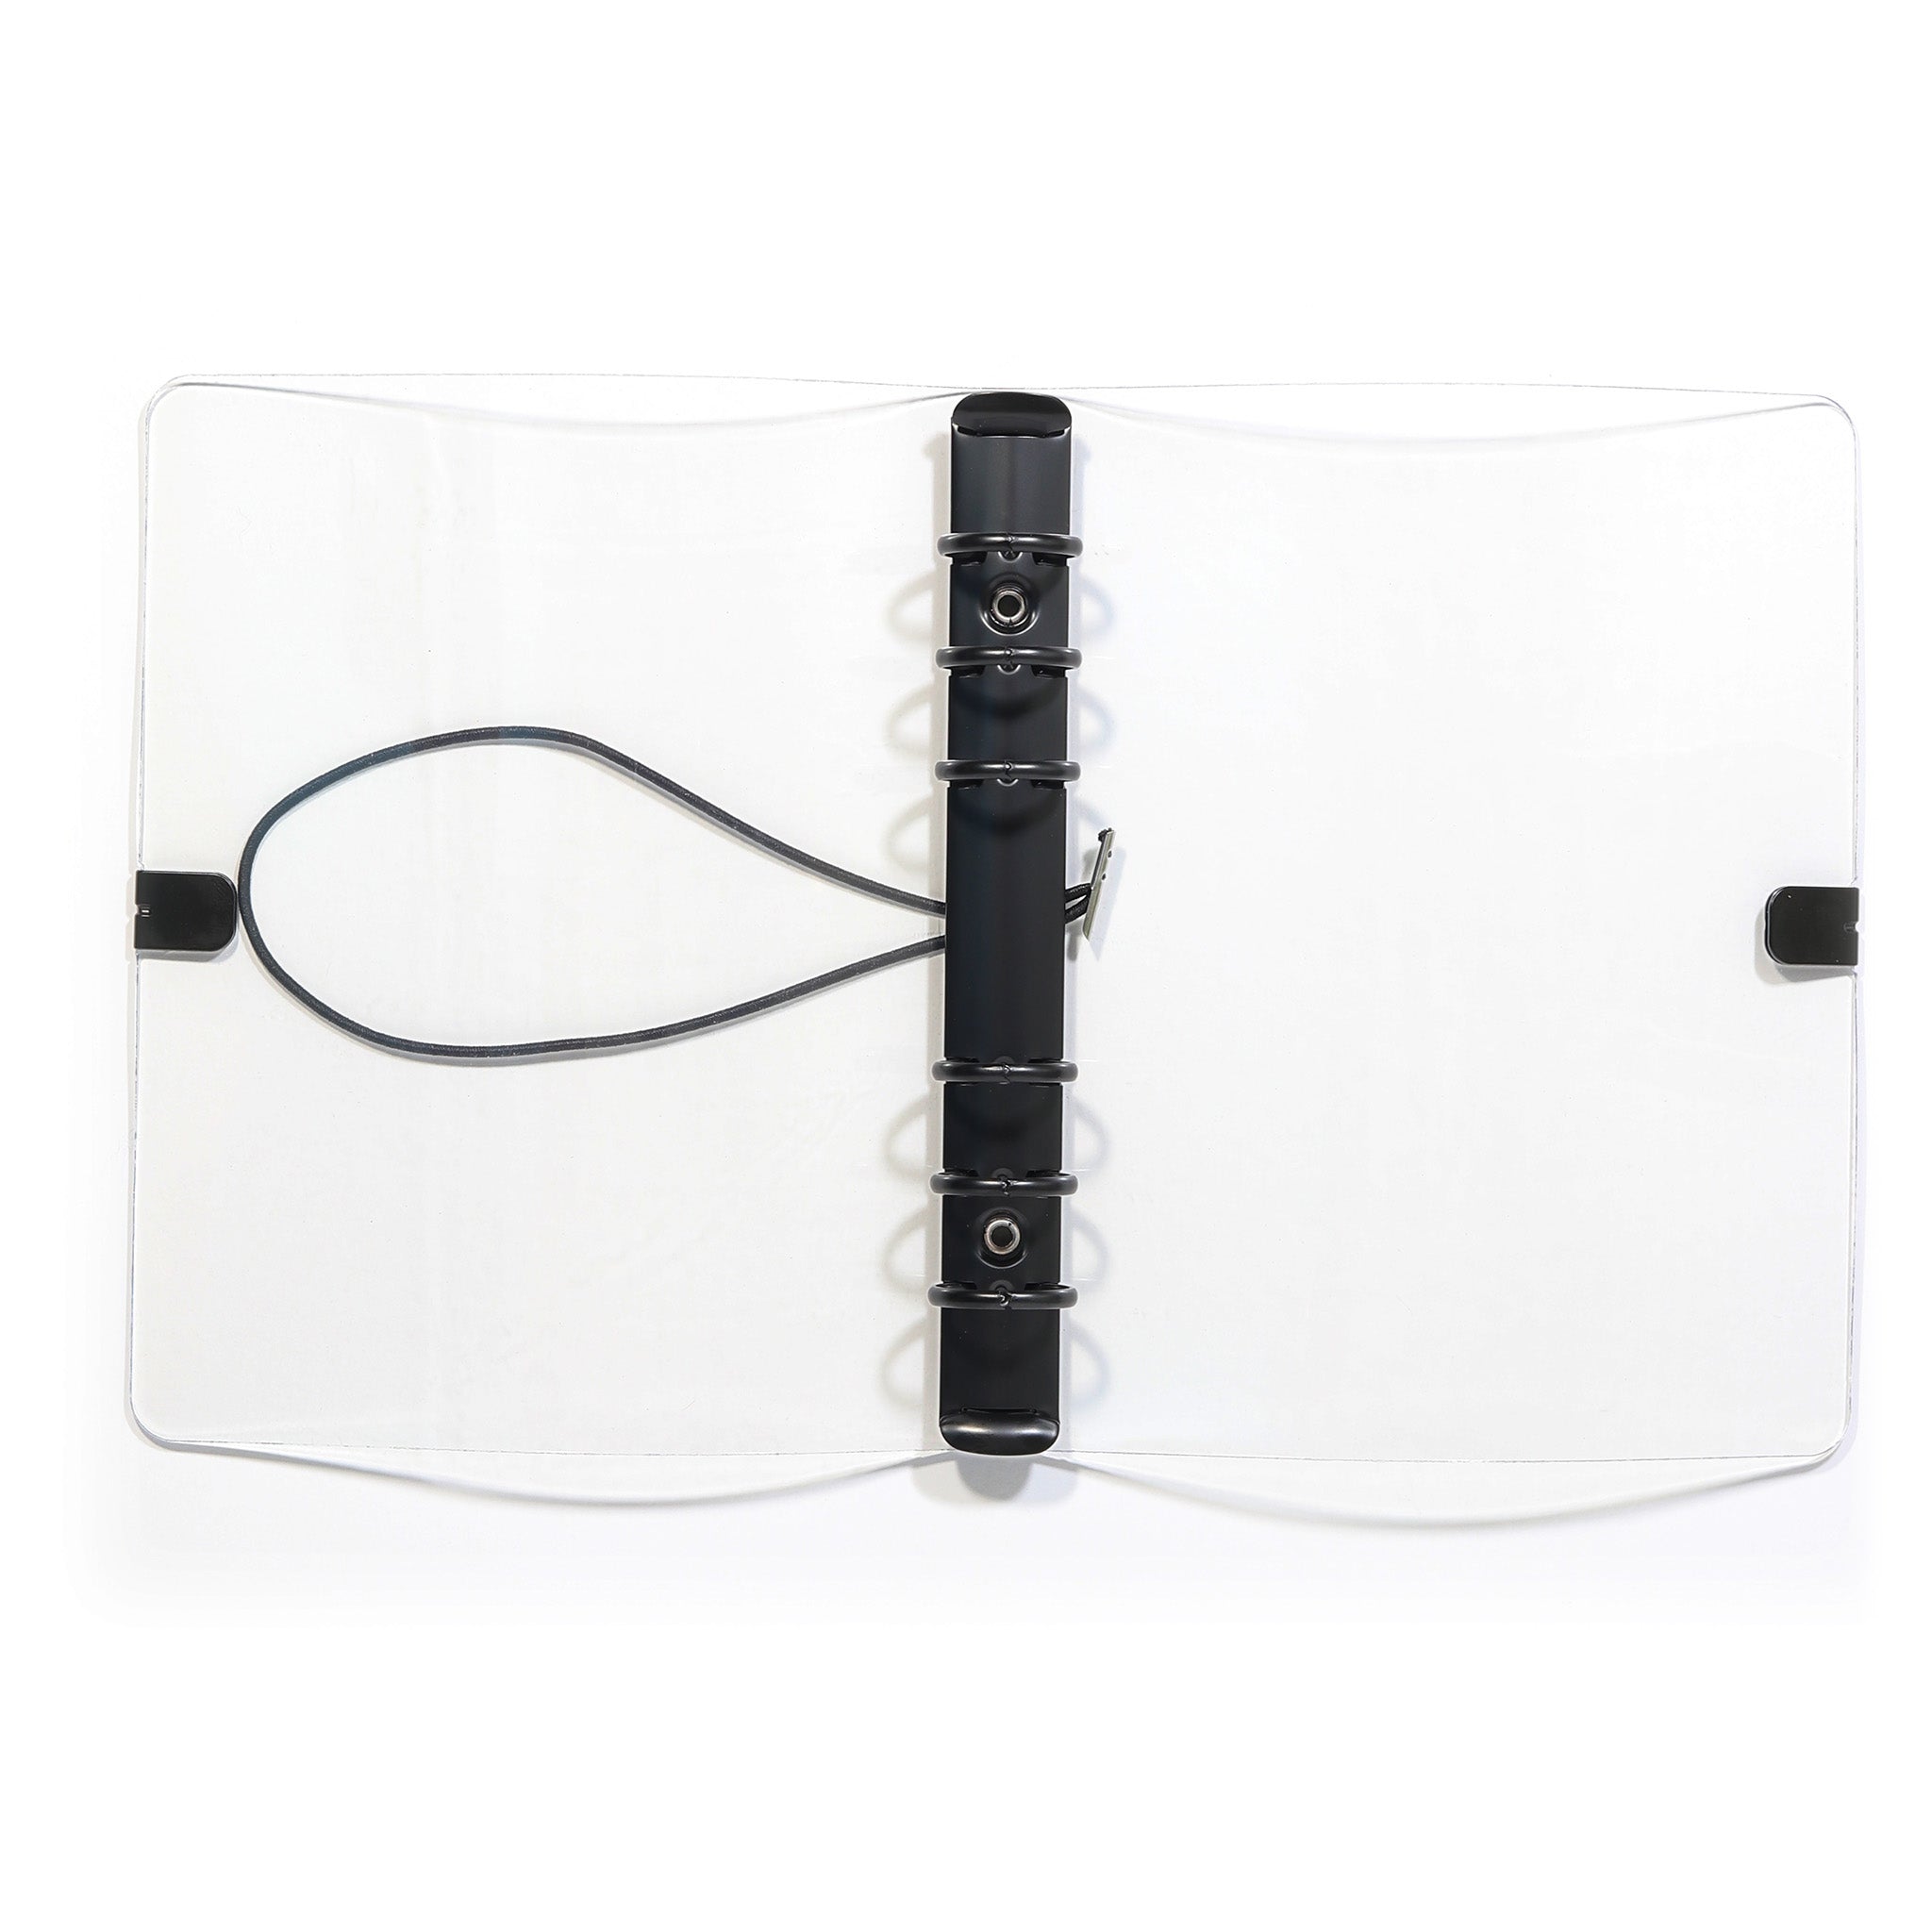 Personal Rings Budget Binder - Cream Luxe